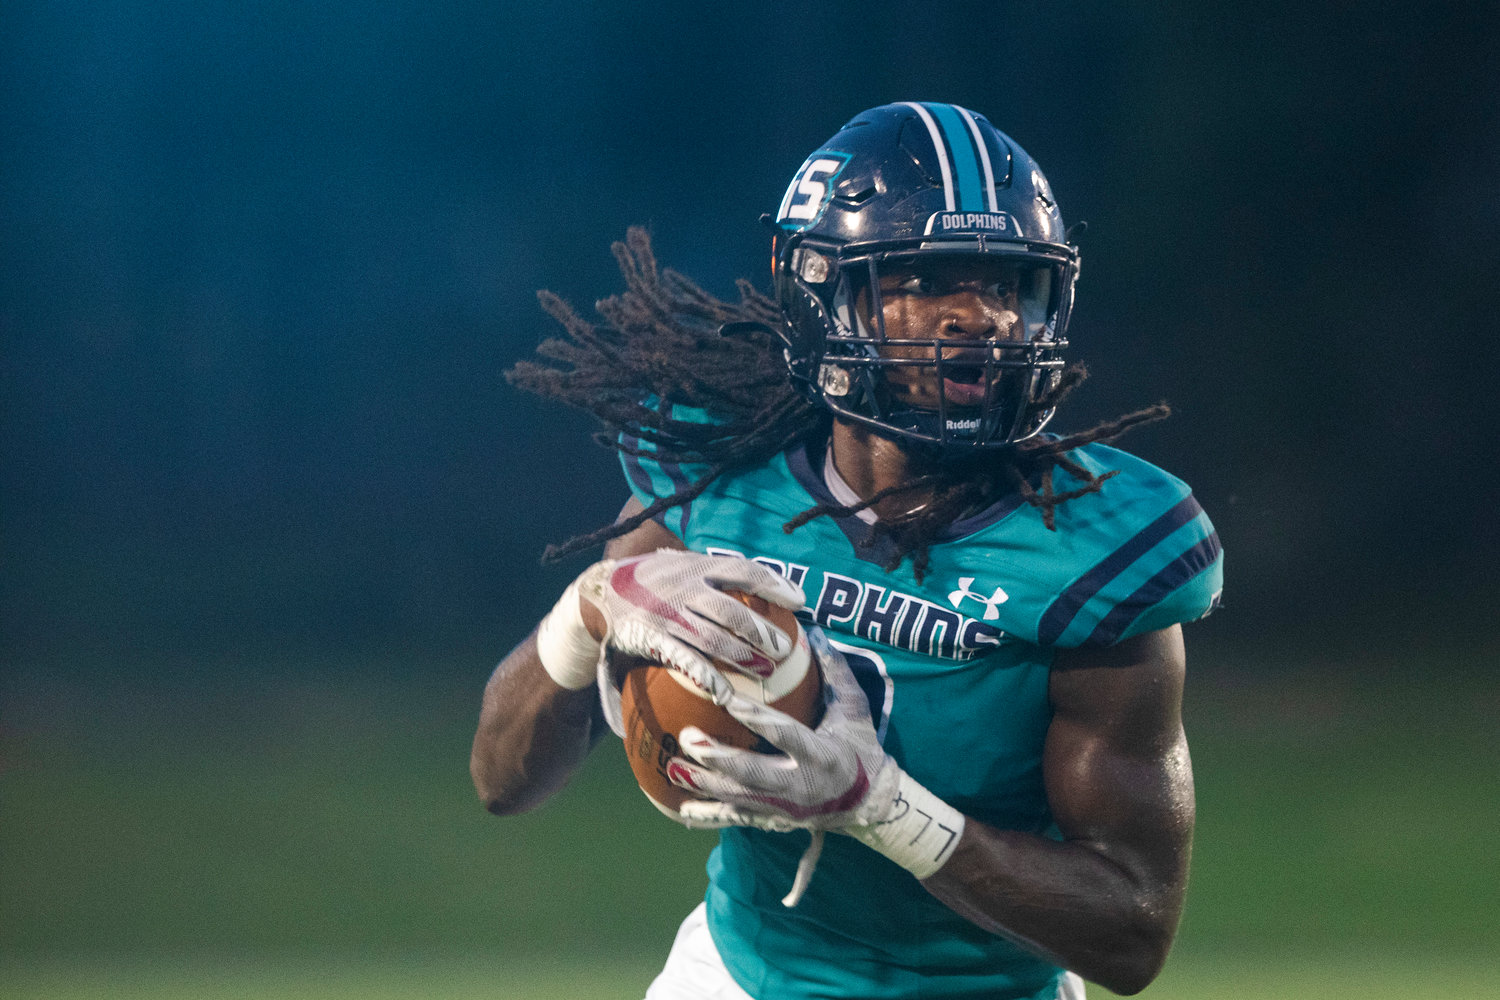 Gulf Shores junior Ronnie Royal secures a catch and looks to make a move in the Dolphins’ season-opening game against St. Michael Catholic Aug. 18. Gulf Shores checked in at No. 7 in this week’s ASWA rankings heading into Week 5.